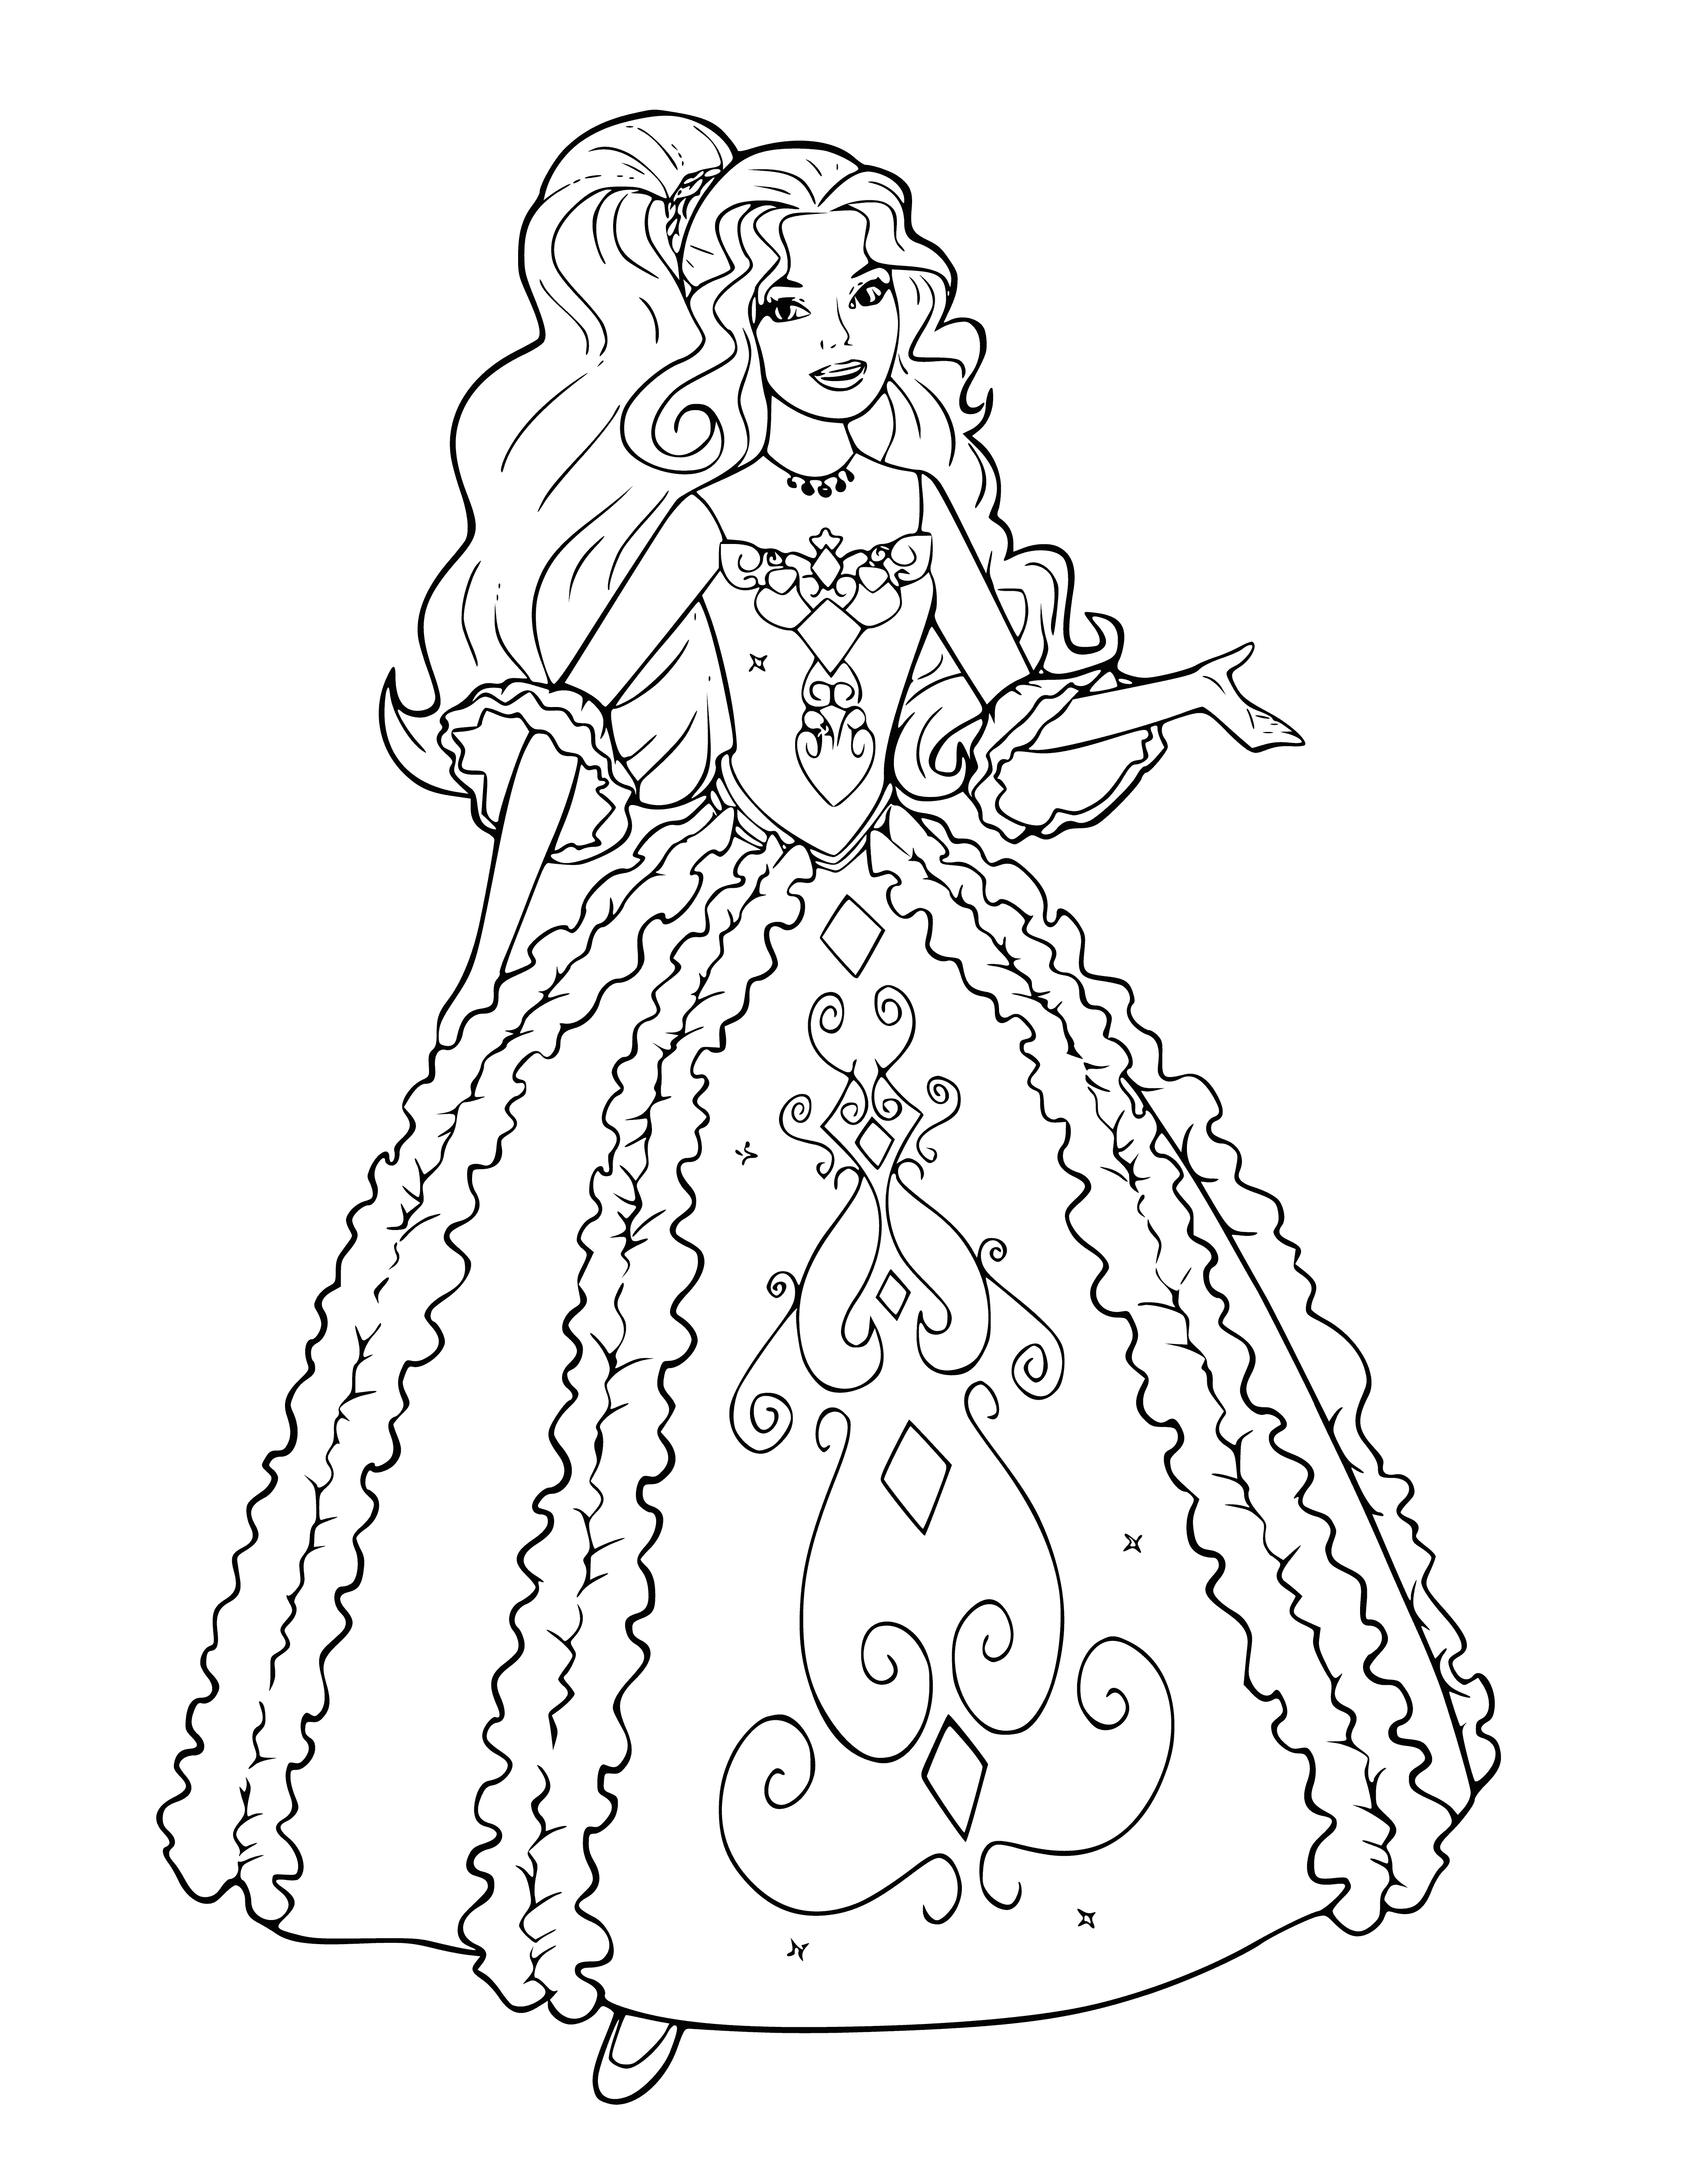 coloring page: Barbie stands in a fancy blue dress & bun, holding a purse & blue earrings in front of a big castle. #dreamlife